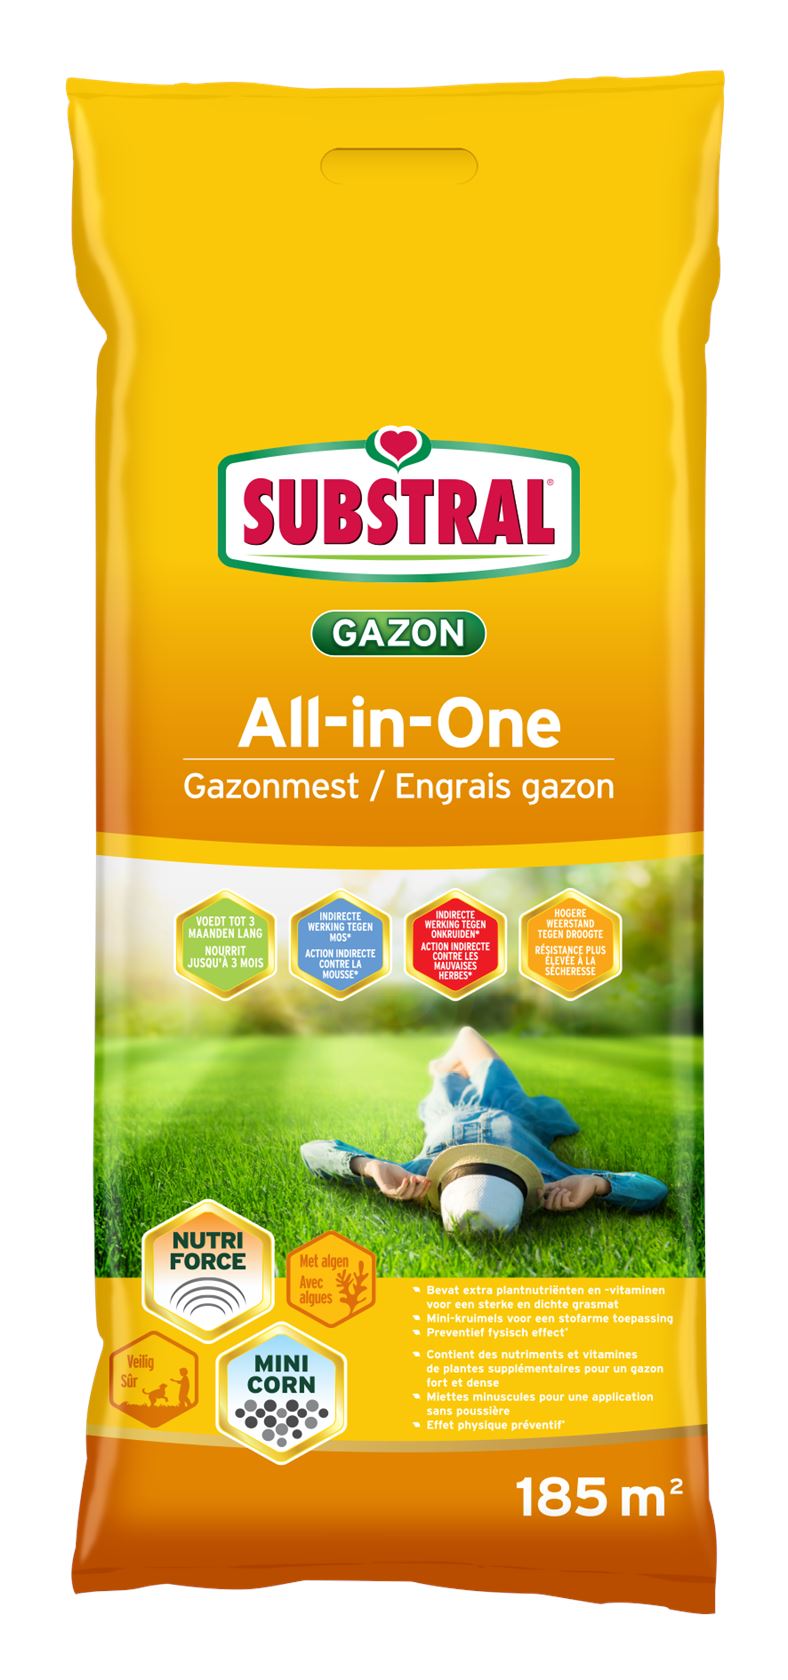 Substral-Gazonmest-All-in-One-9-5kg